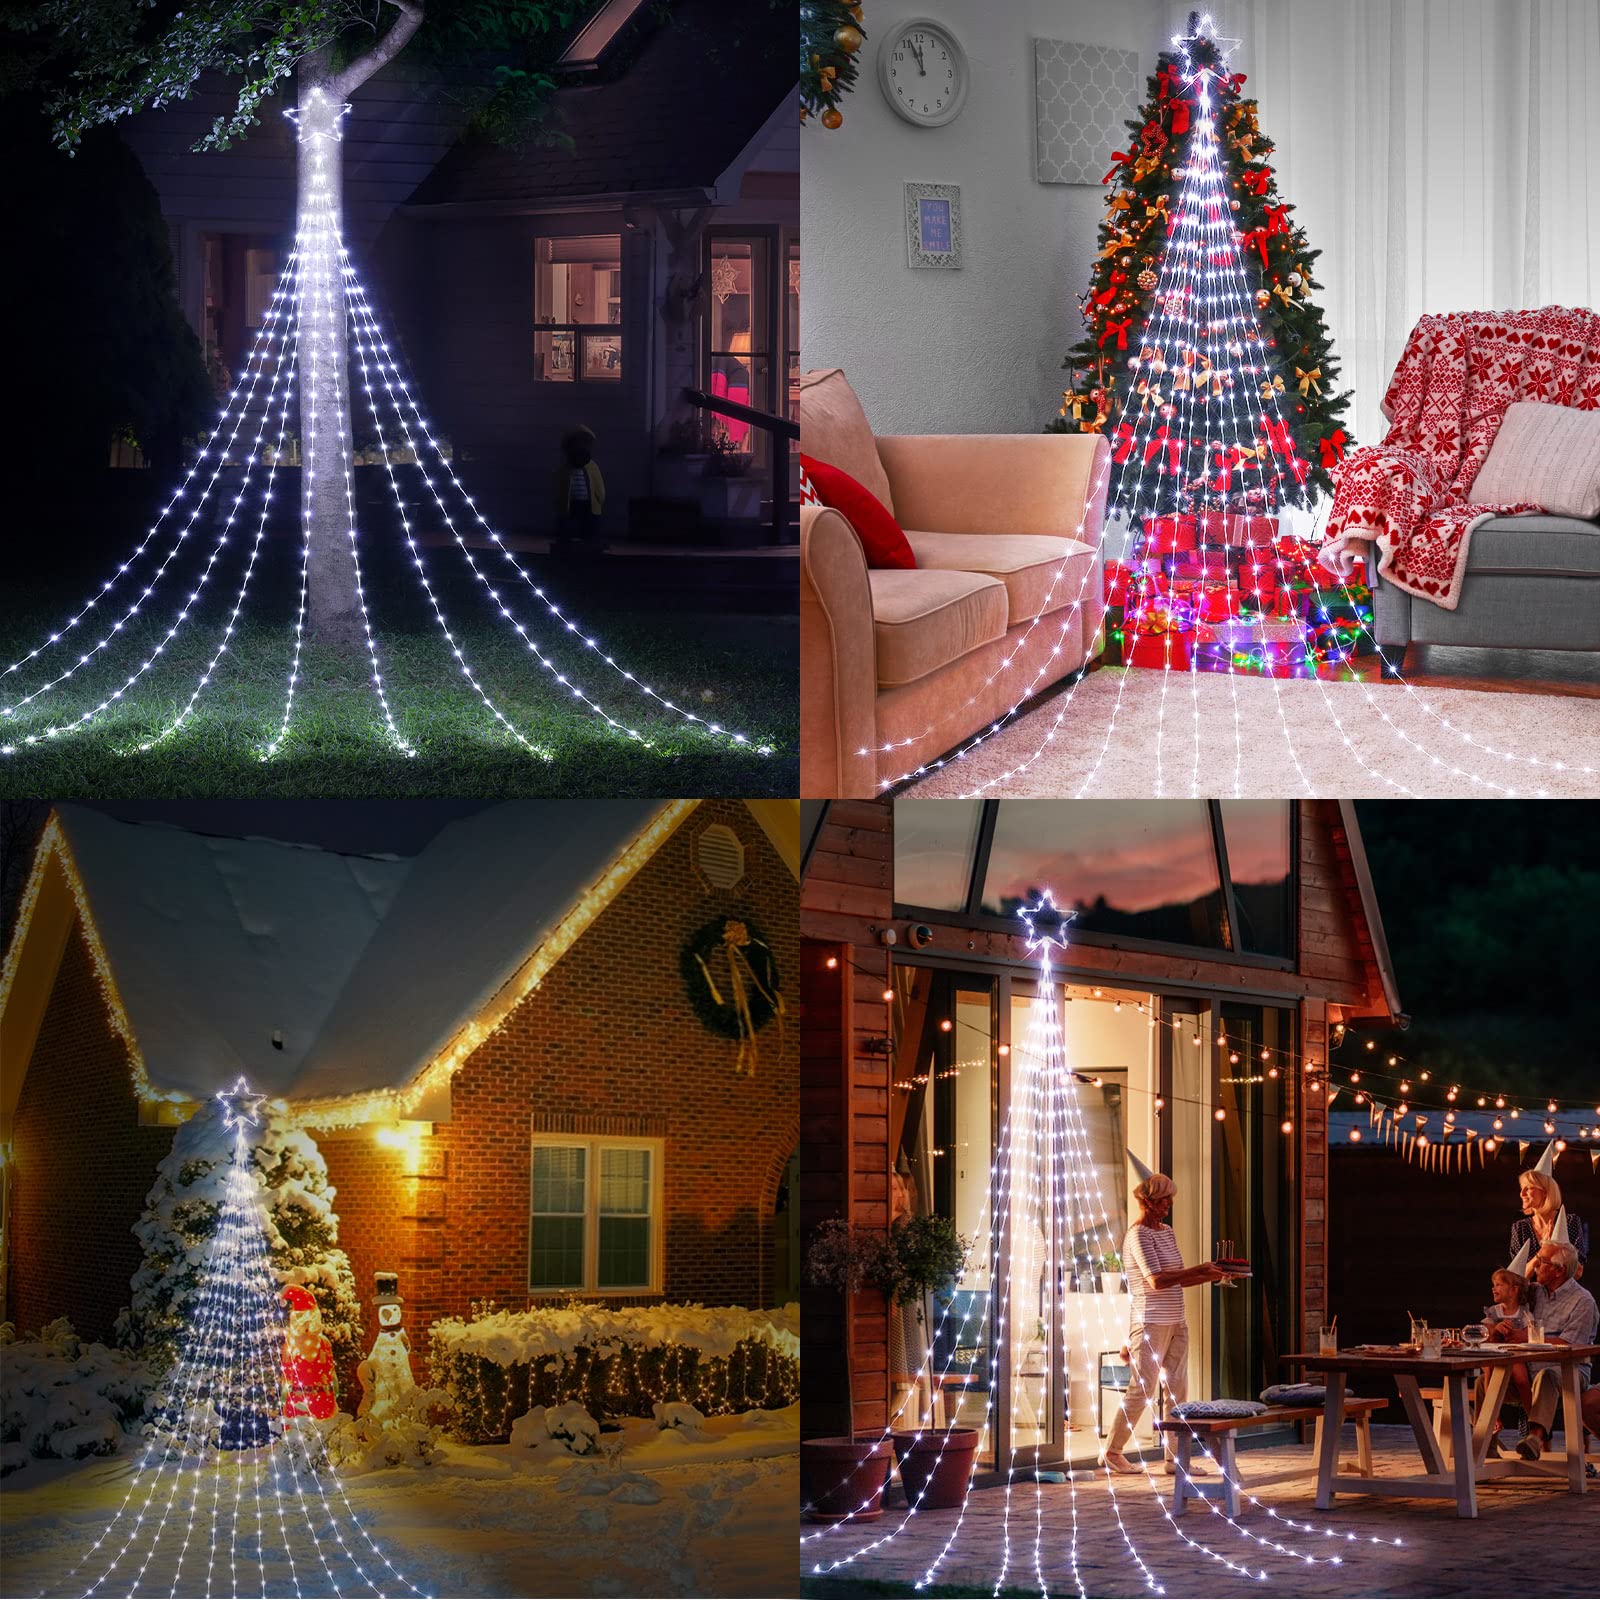 Christmas Tree String Lights with Star Topper